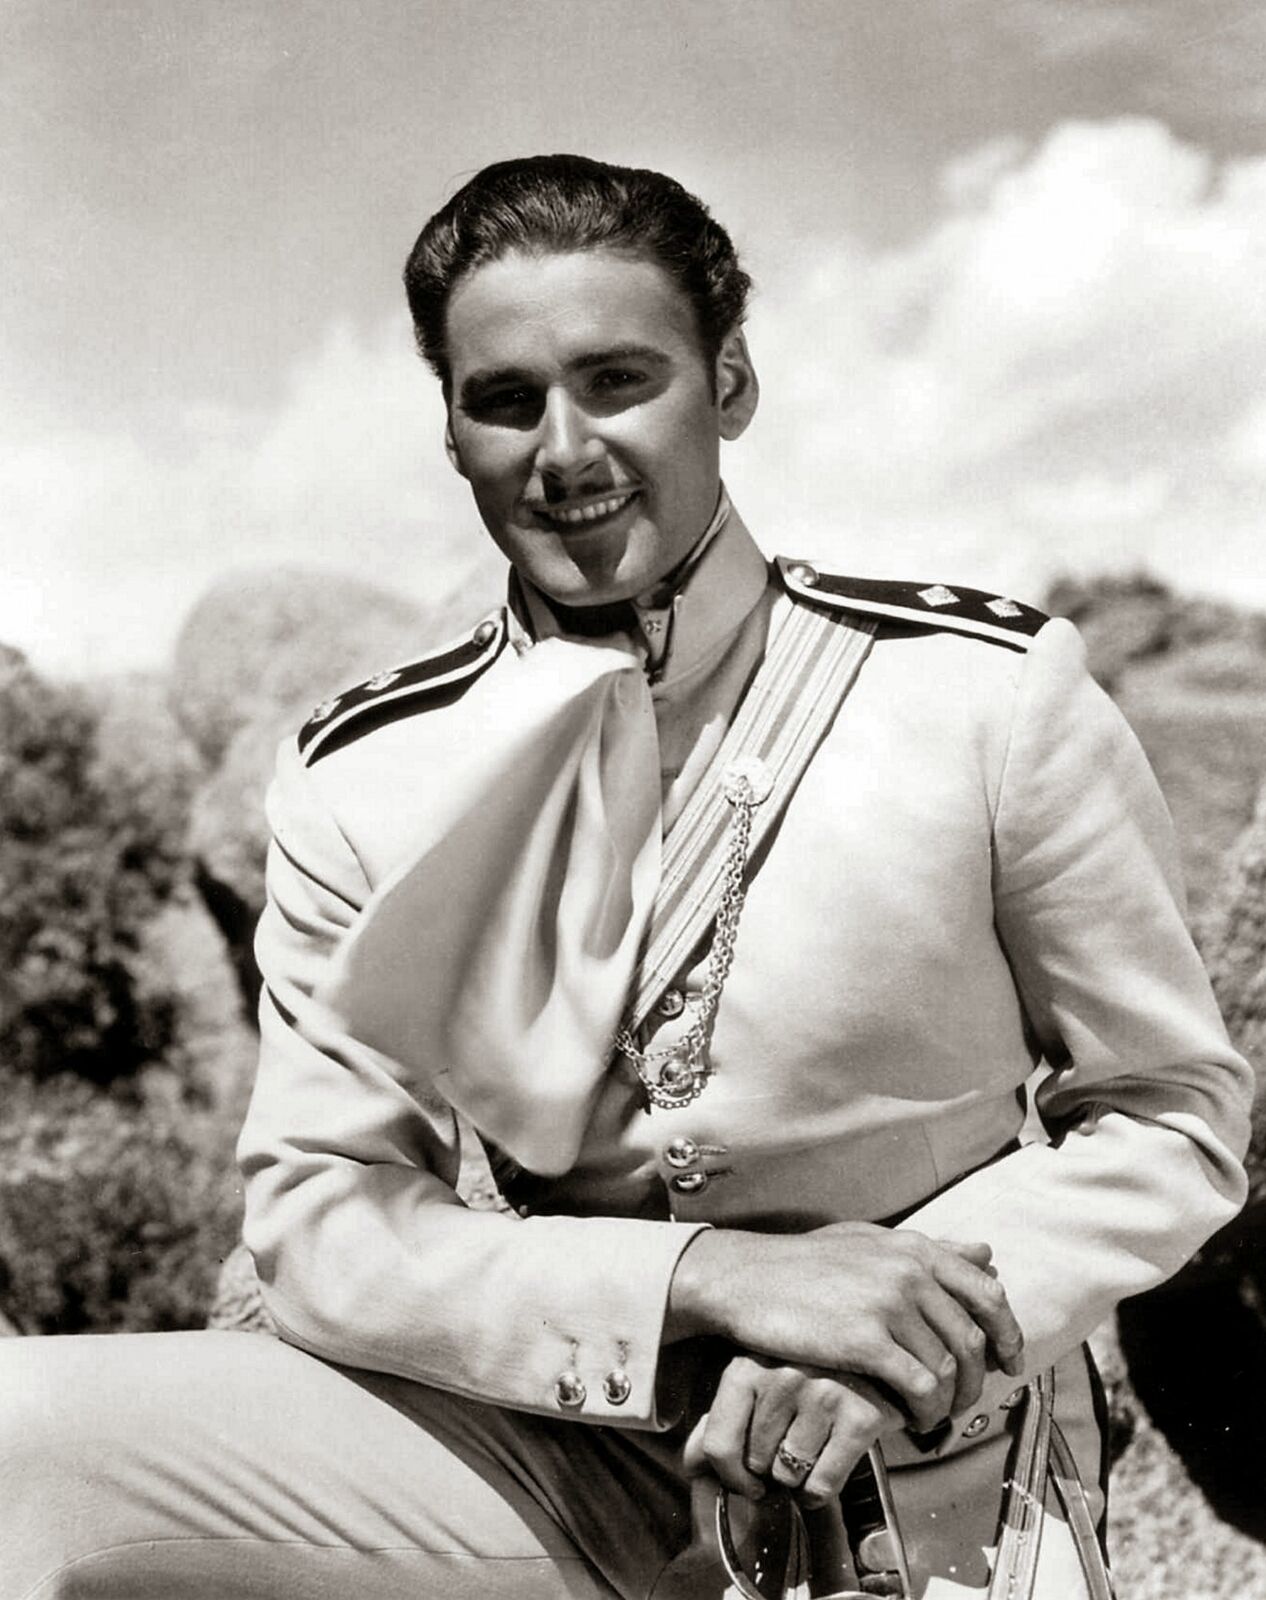 1936 ERROL FLYNN in THE CHARGE OF THE LIGHT BRIGADE Photo  (206-b )